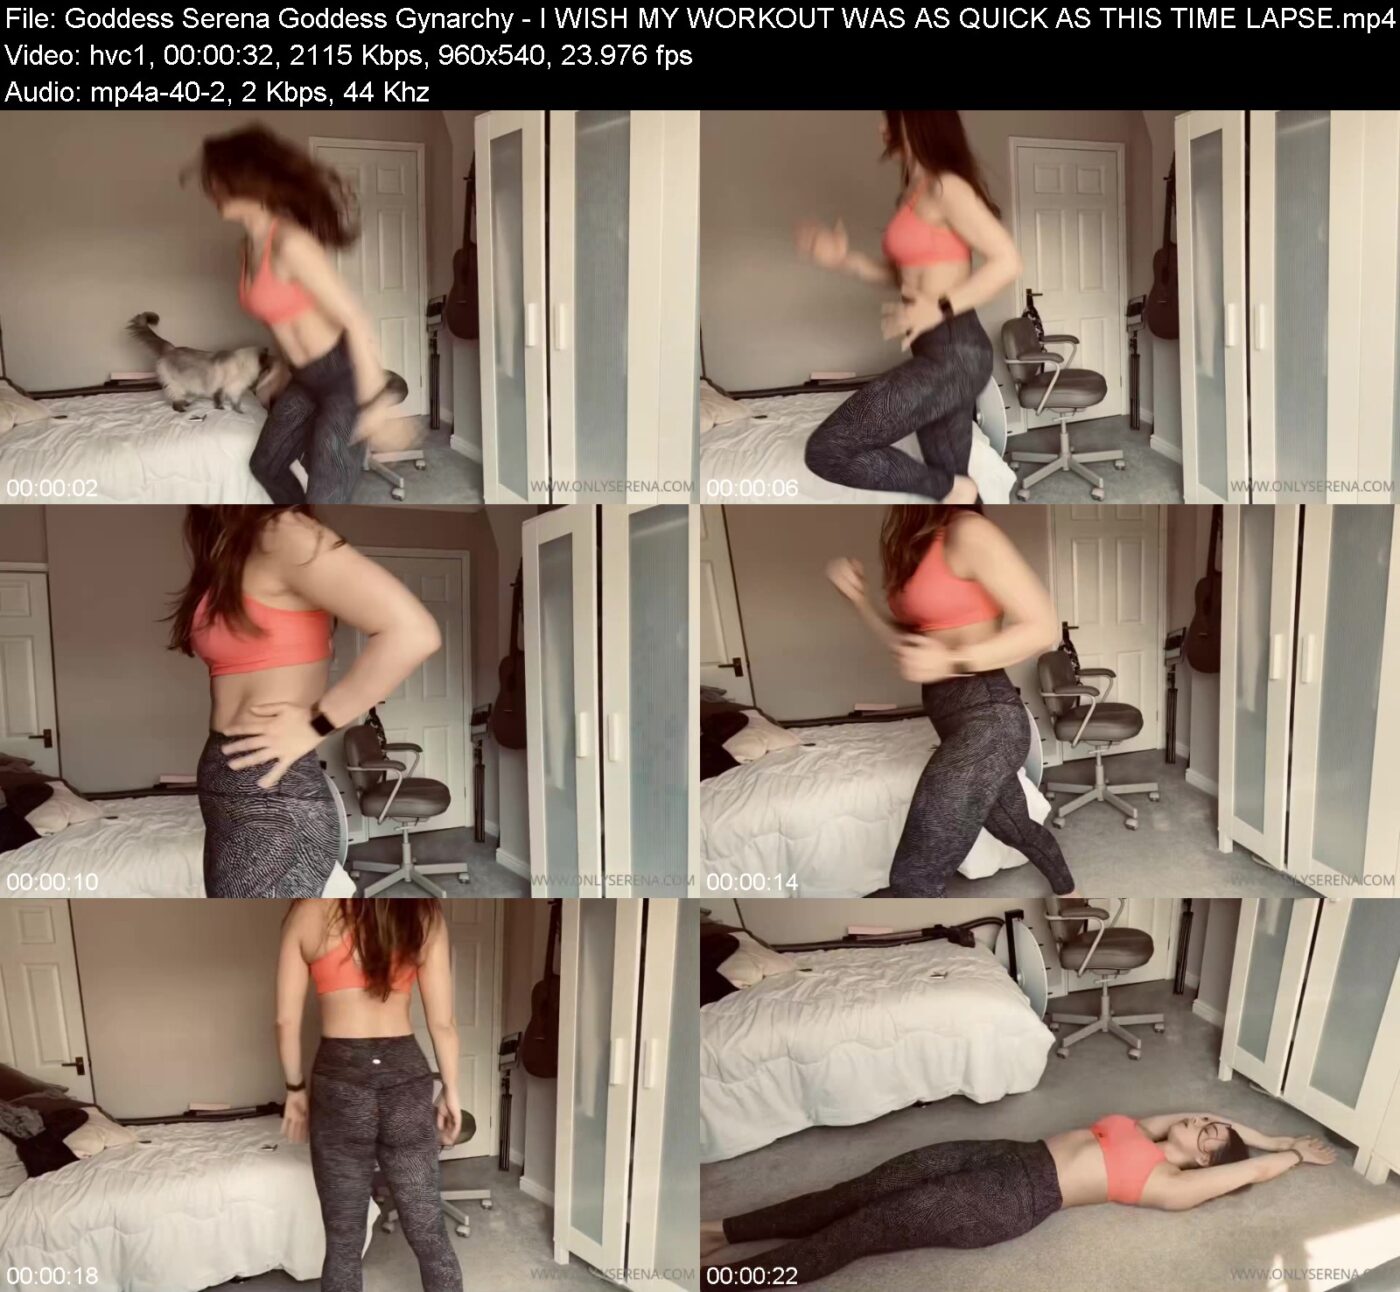 Actress: Goddess Serena Goddess Gynarchy. Title and Studio: I WISH MY WORKOUT WAS AS QUICK AS THIS TIME LAPSE